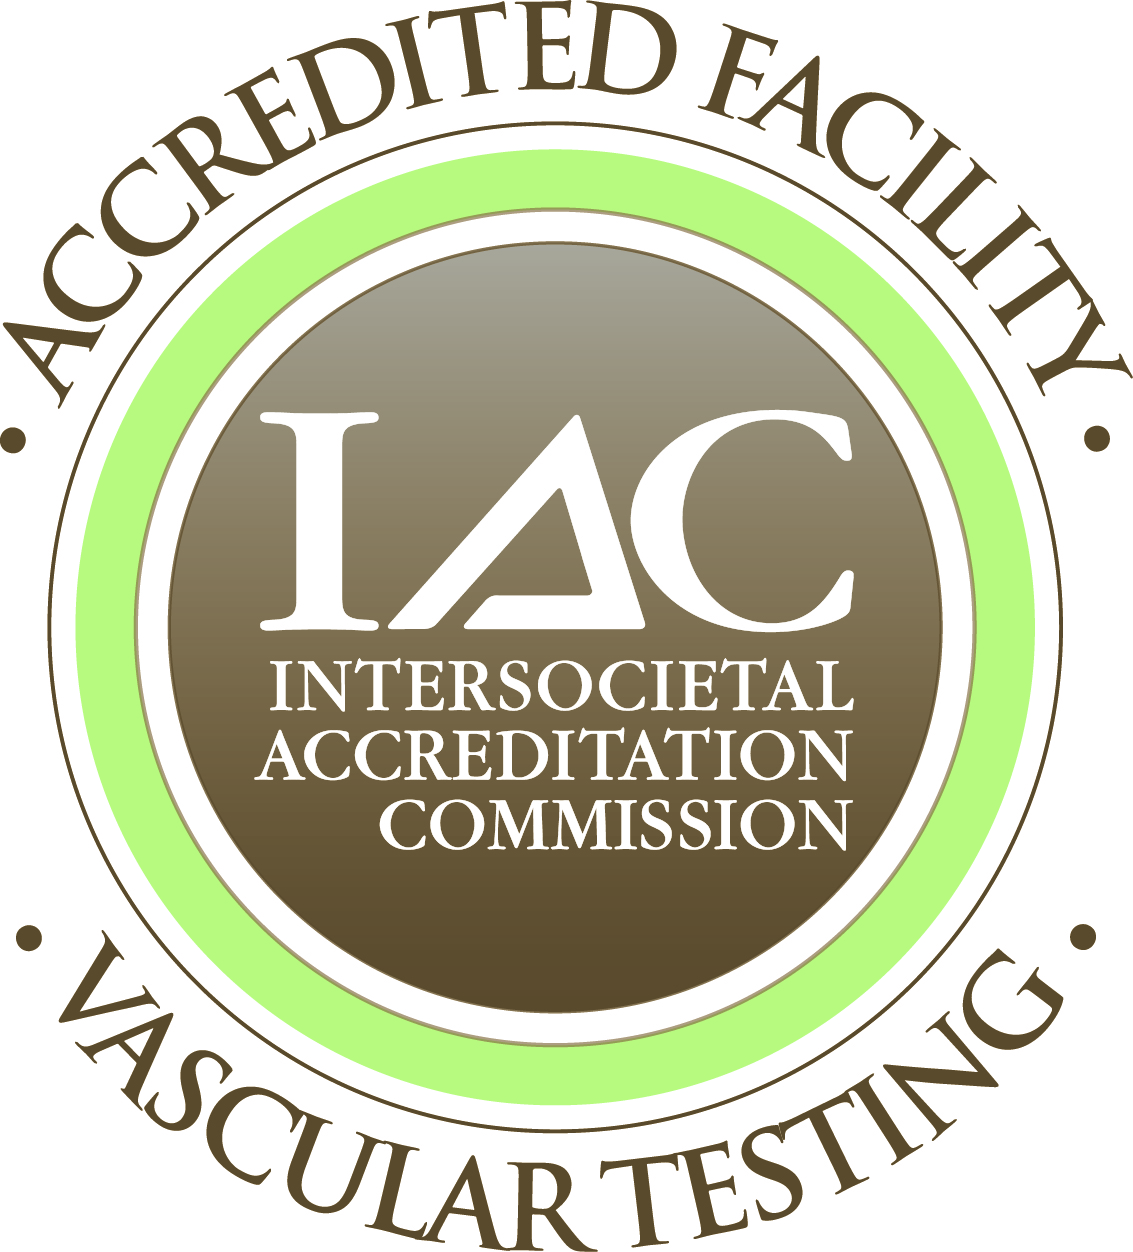 Michigan Vascular is a fully-accredited vascular laboratory.